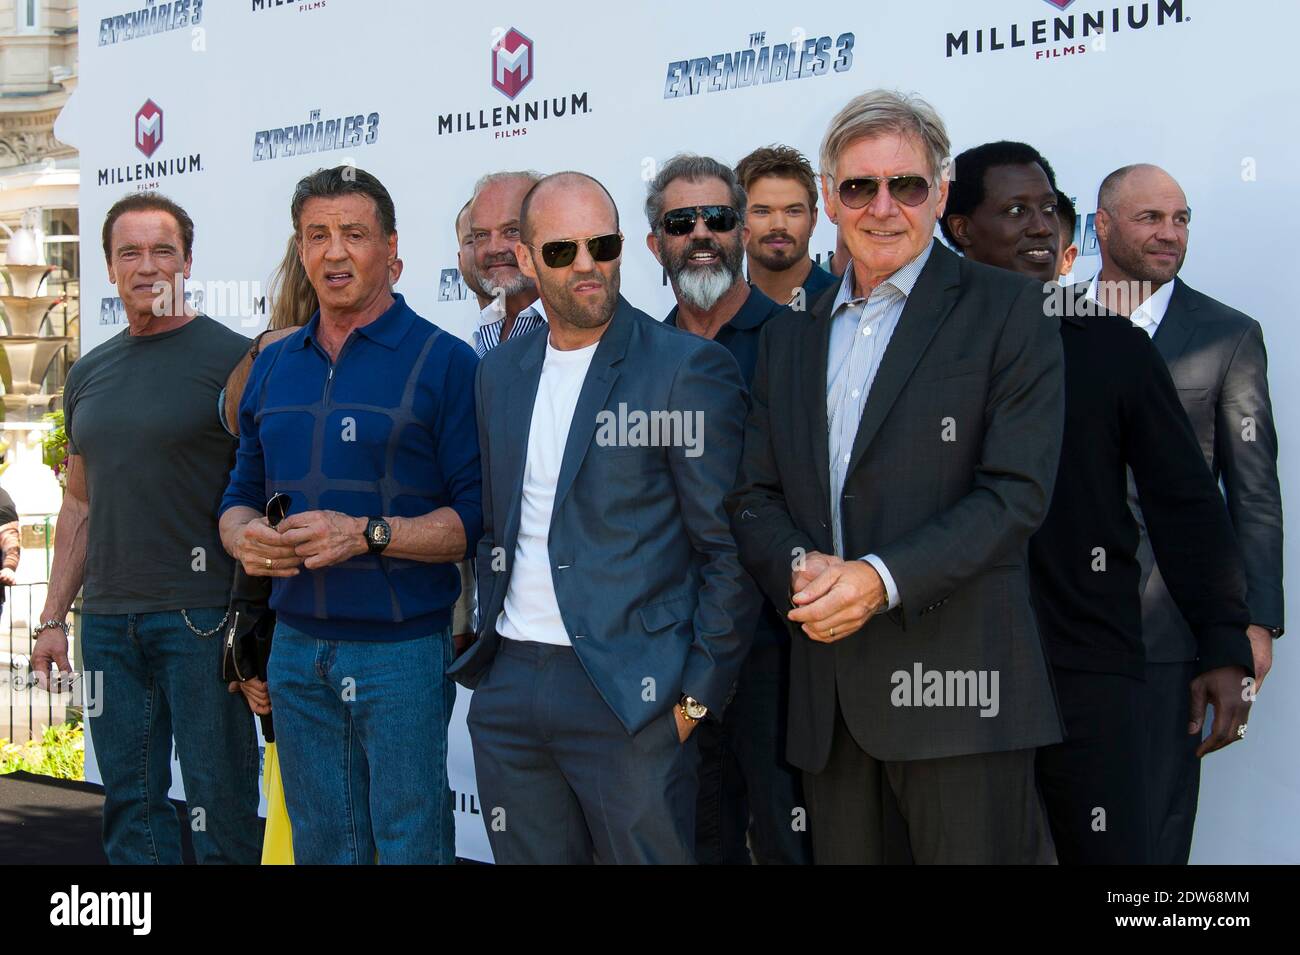 The cast including Director Patrick Hughes, Sylvester Stallone, Jason Statham, Harrison Ford, Wesley Snipes, Dolph Lundgren, Glen Powell, Randy Couture, Antonio Banderas, Arnold Schwarzenegger, Kellan Lutz and Natalie Burn arriving at the photocall of the film Expendables 3 as part of the 67th Cannes International Film Festival in Cannes, southern France on May 18, 2014. Photo by Nicolas Genin/ABACAPRESS.COM Stock Photo